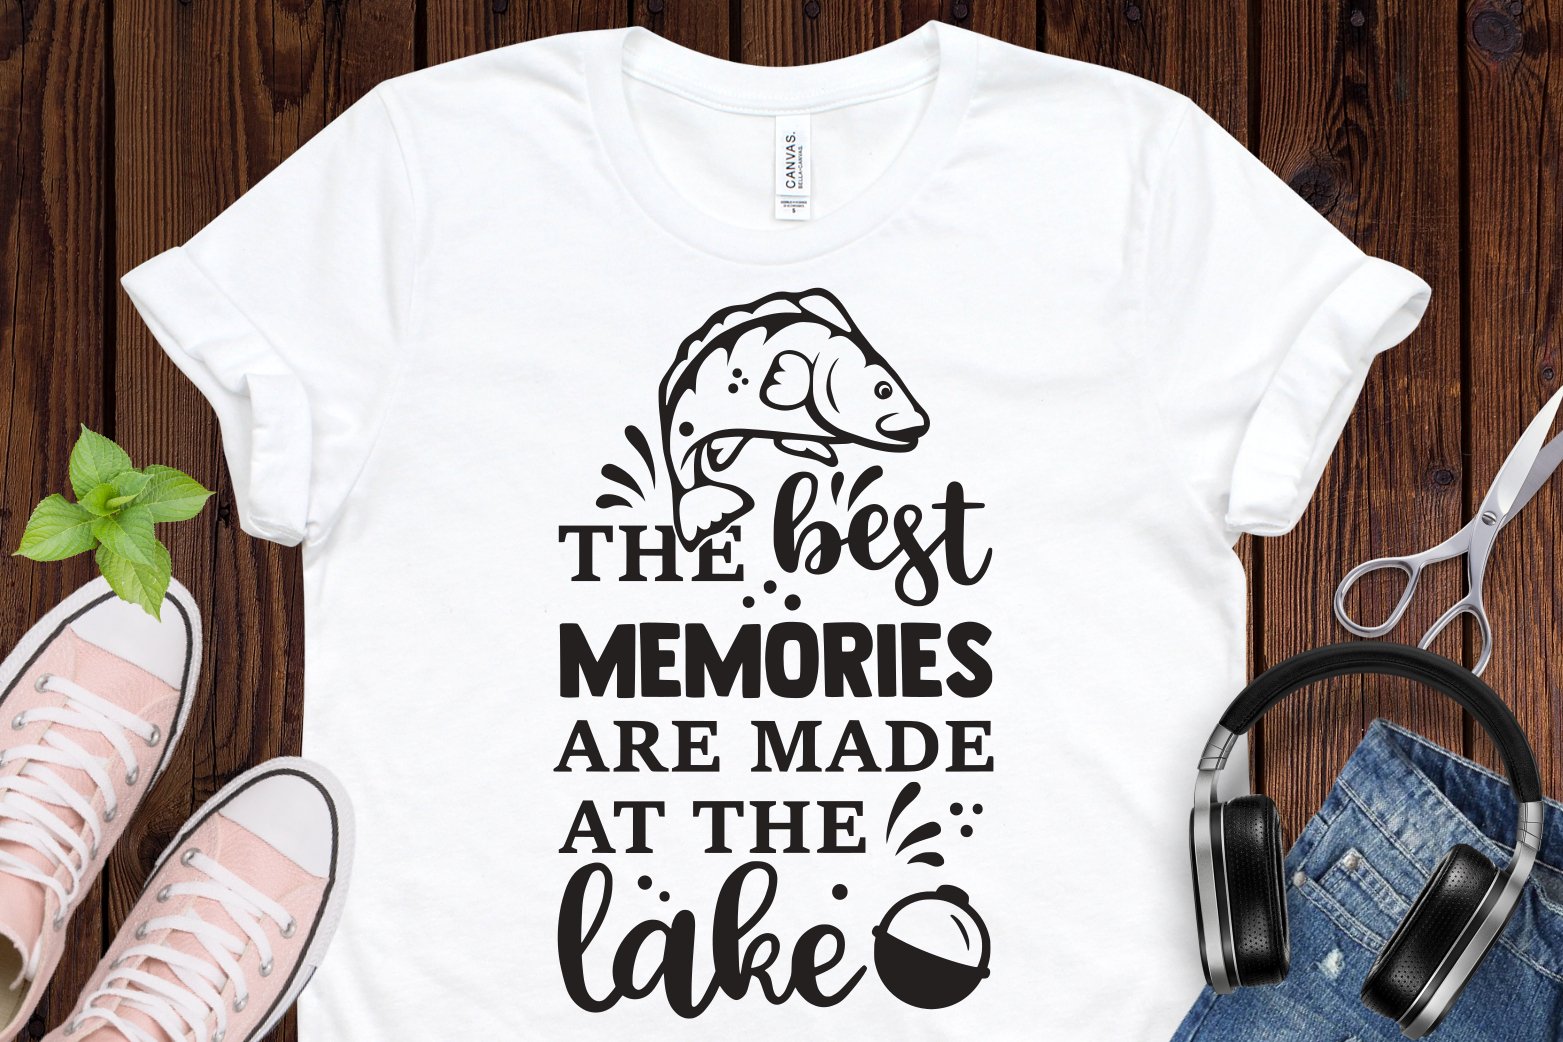 All the best memories are made at the lakes.